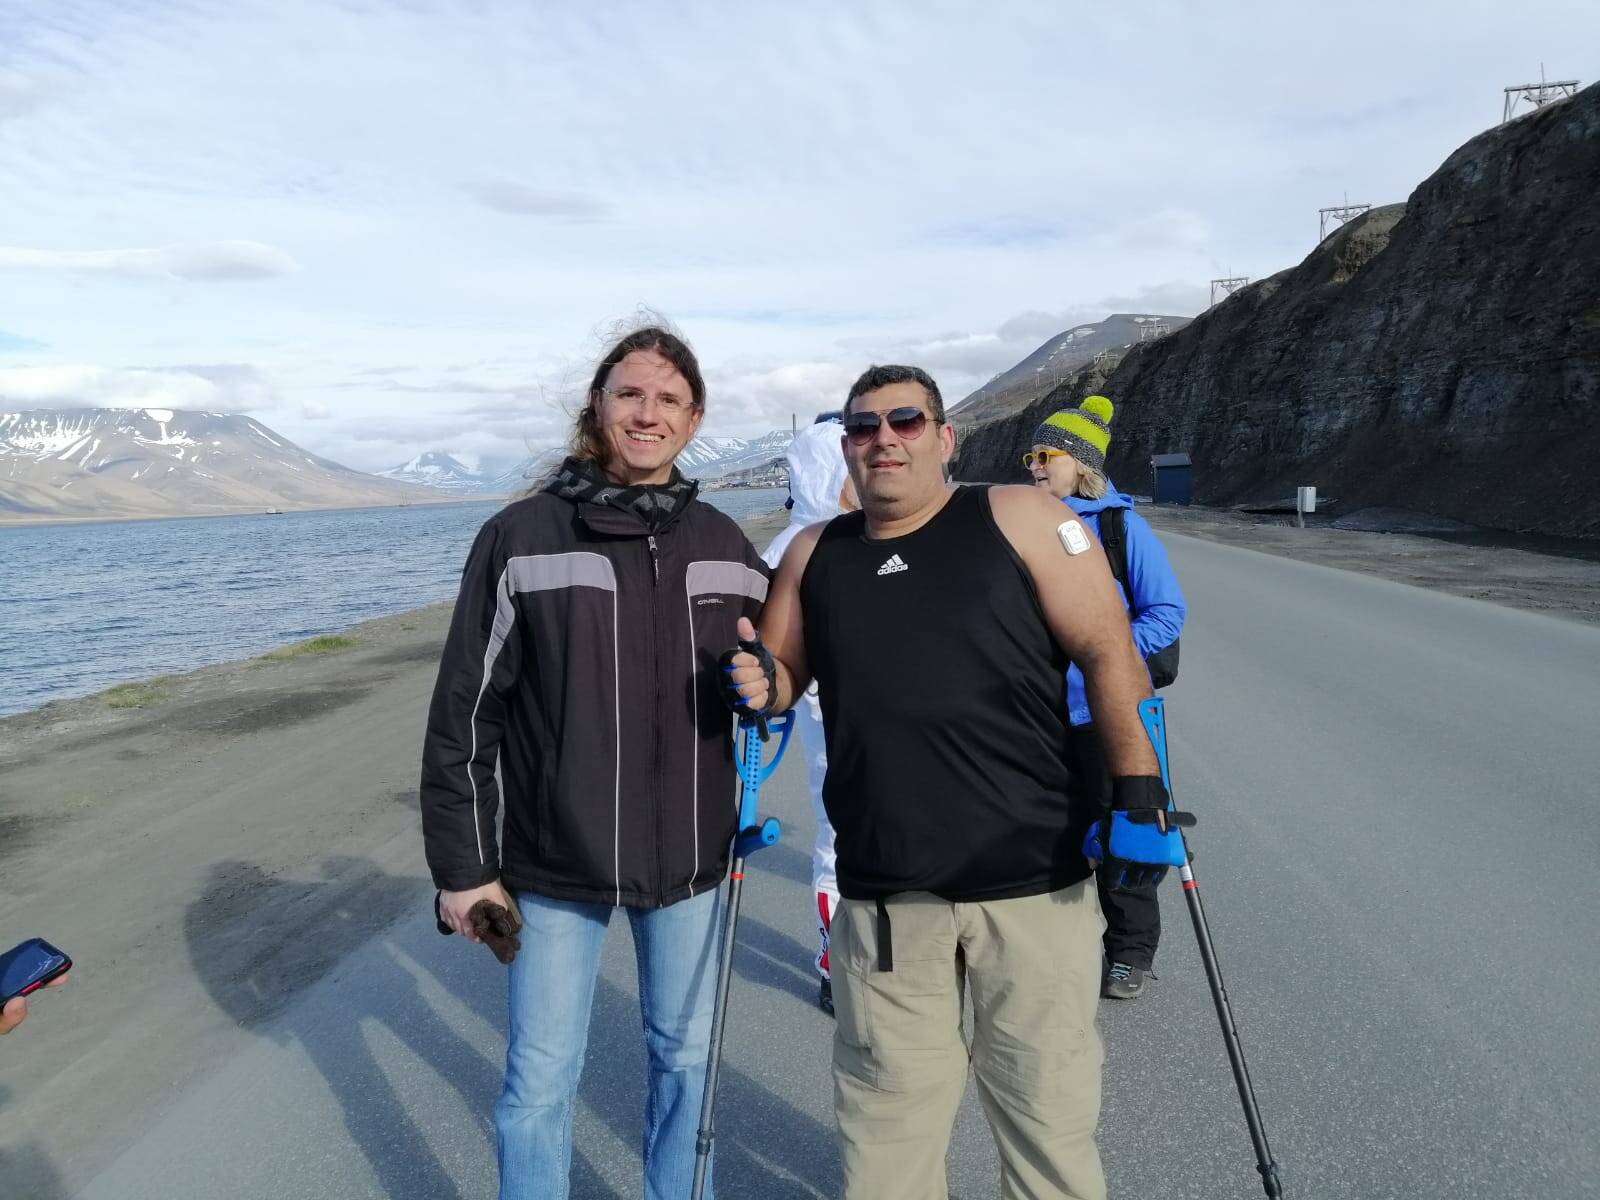 Michael Haddad and Thanos Tsivelikas during the #Walk4FoodSecurity in Svalbard